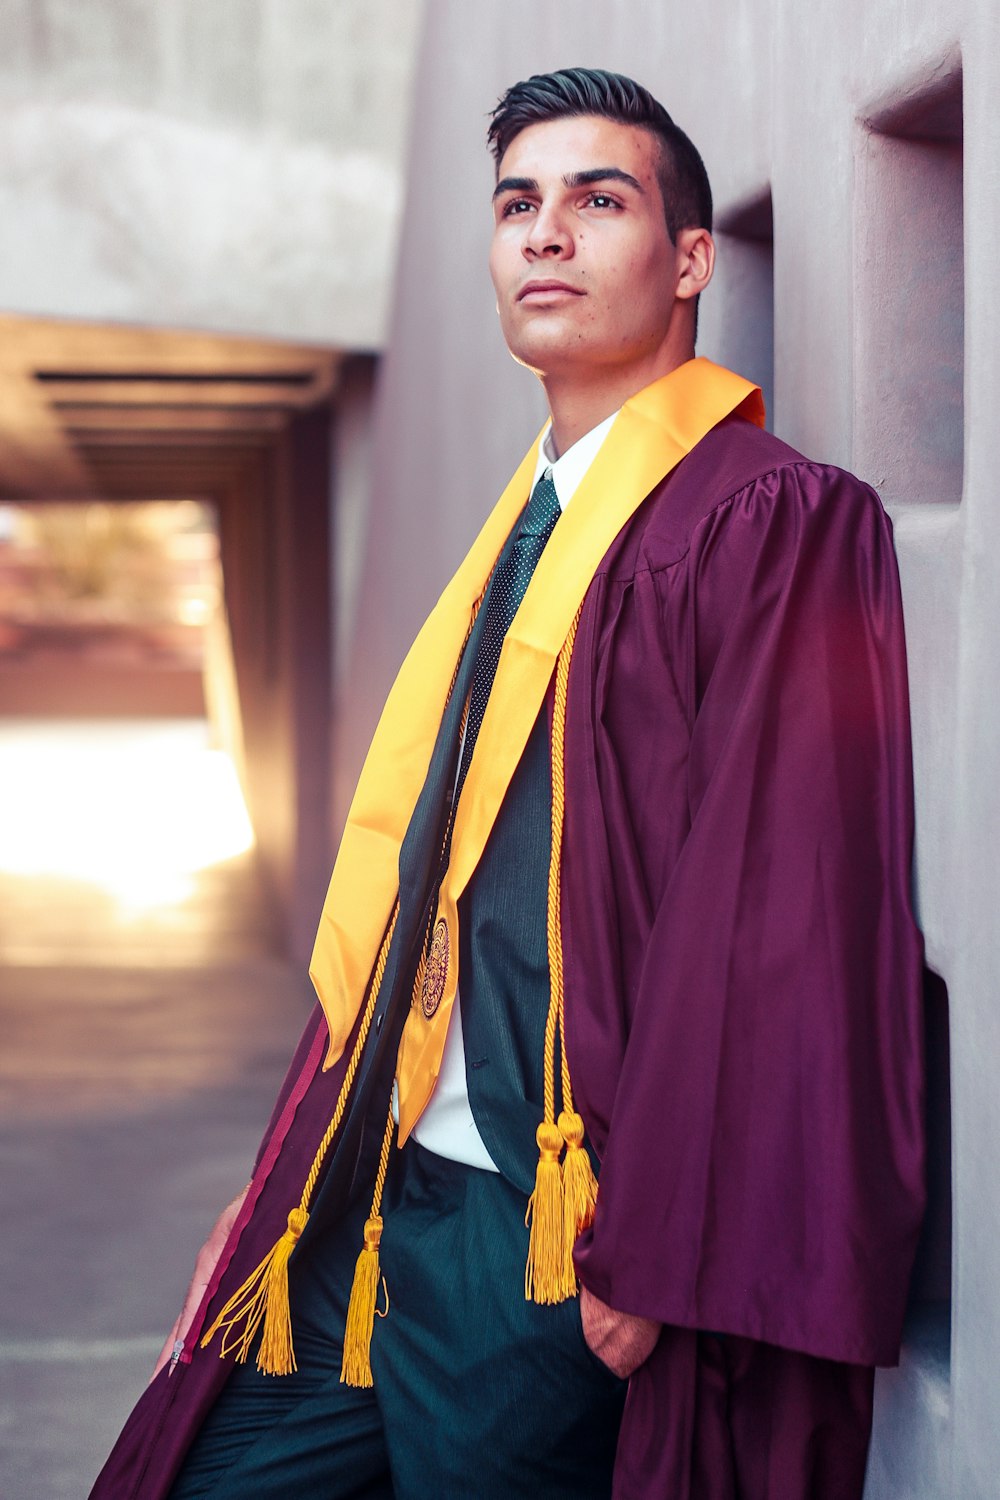 man standing while wearing purple academic gown